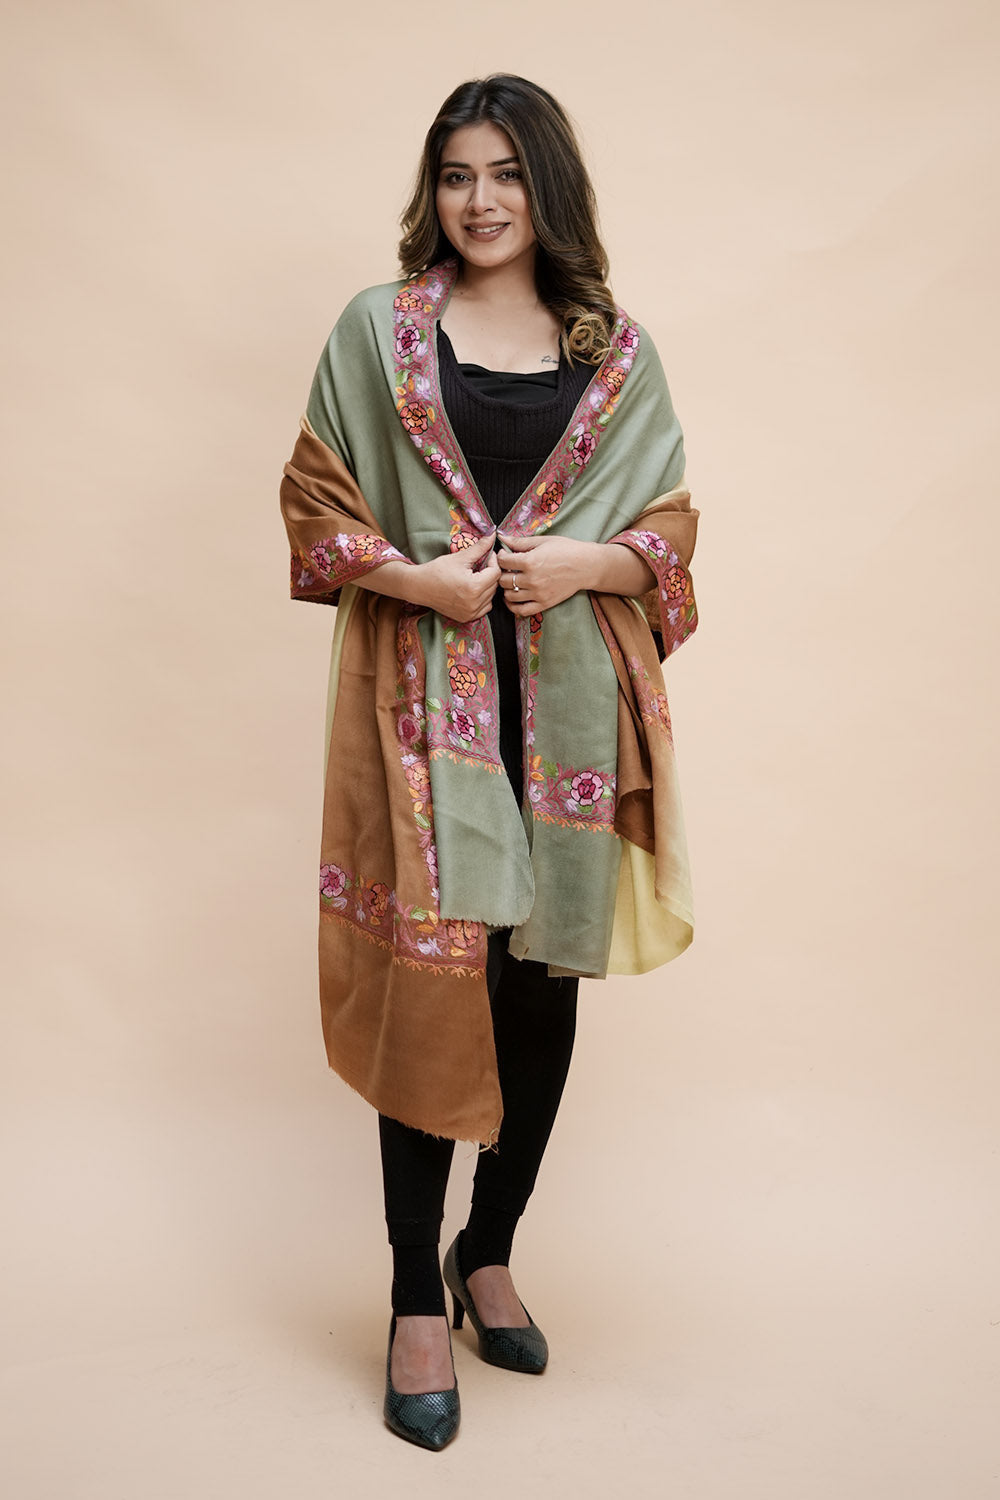 Ombre Color Kashmiri Shawl With Aari Border Gives A Trendy